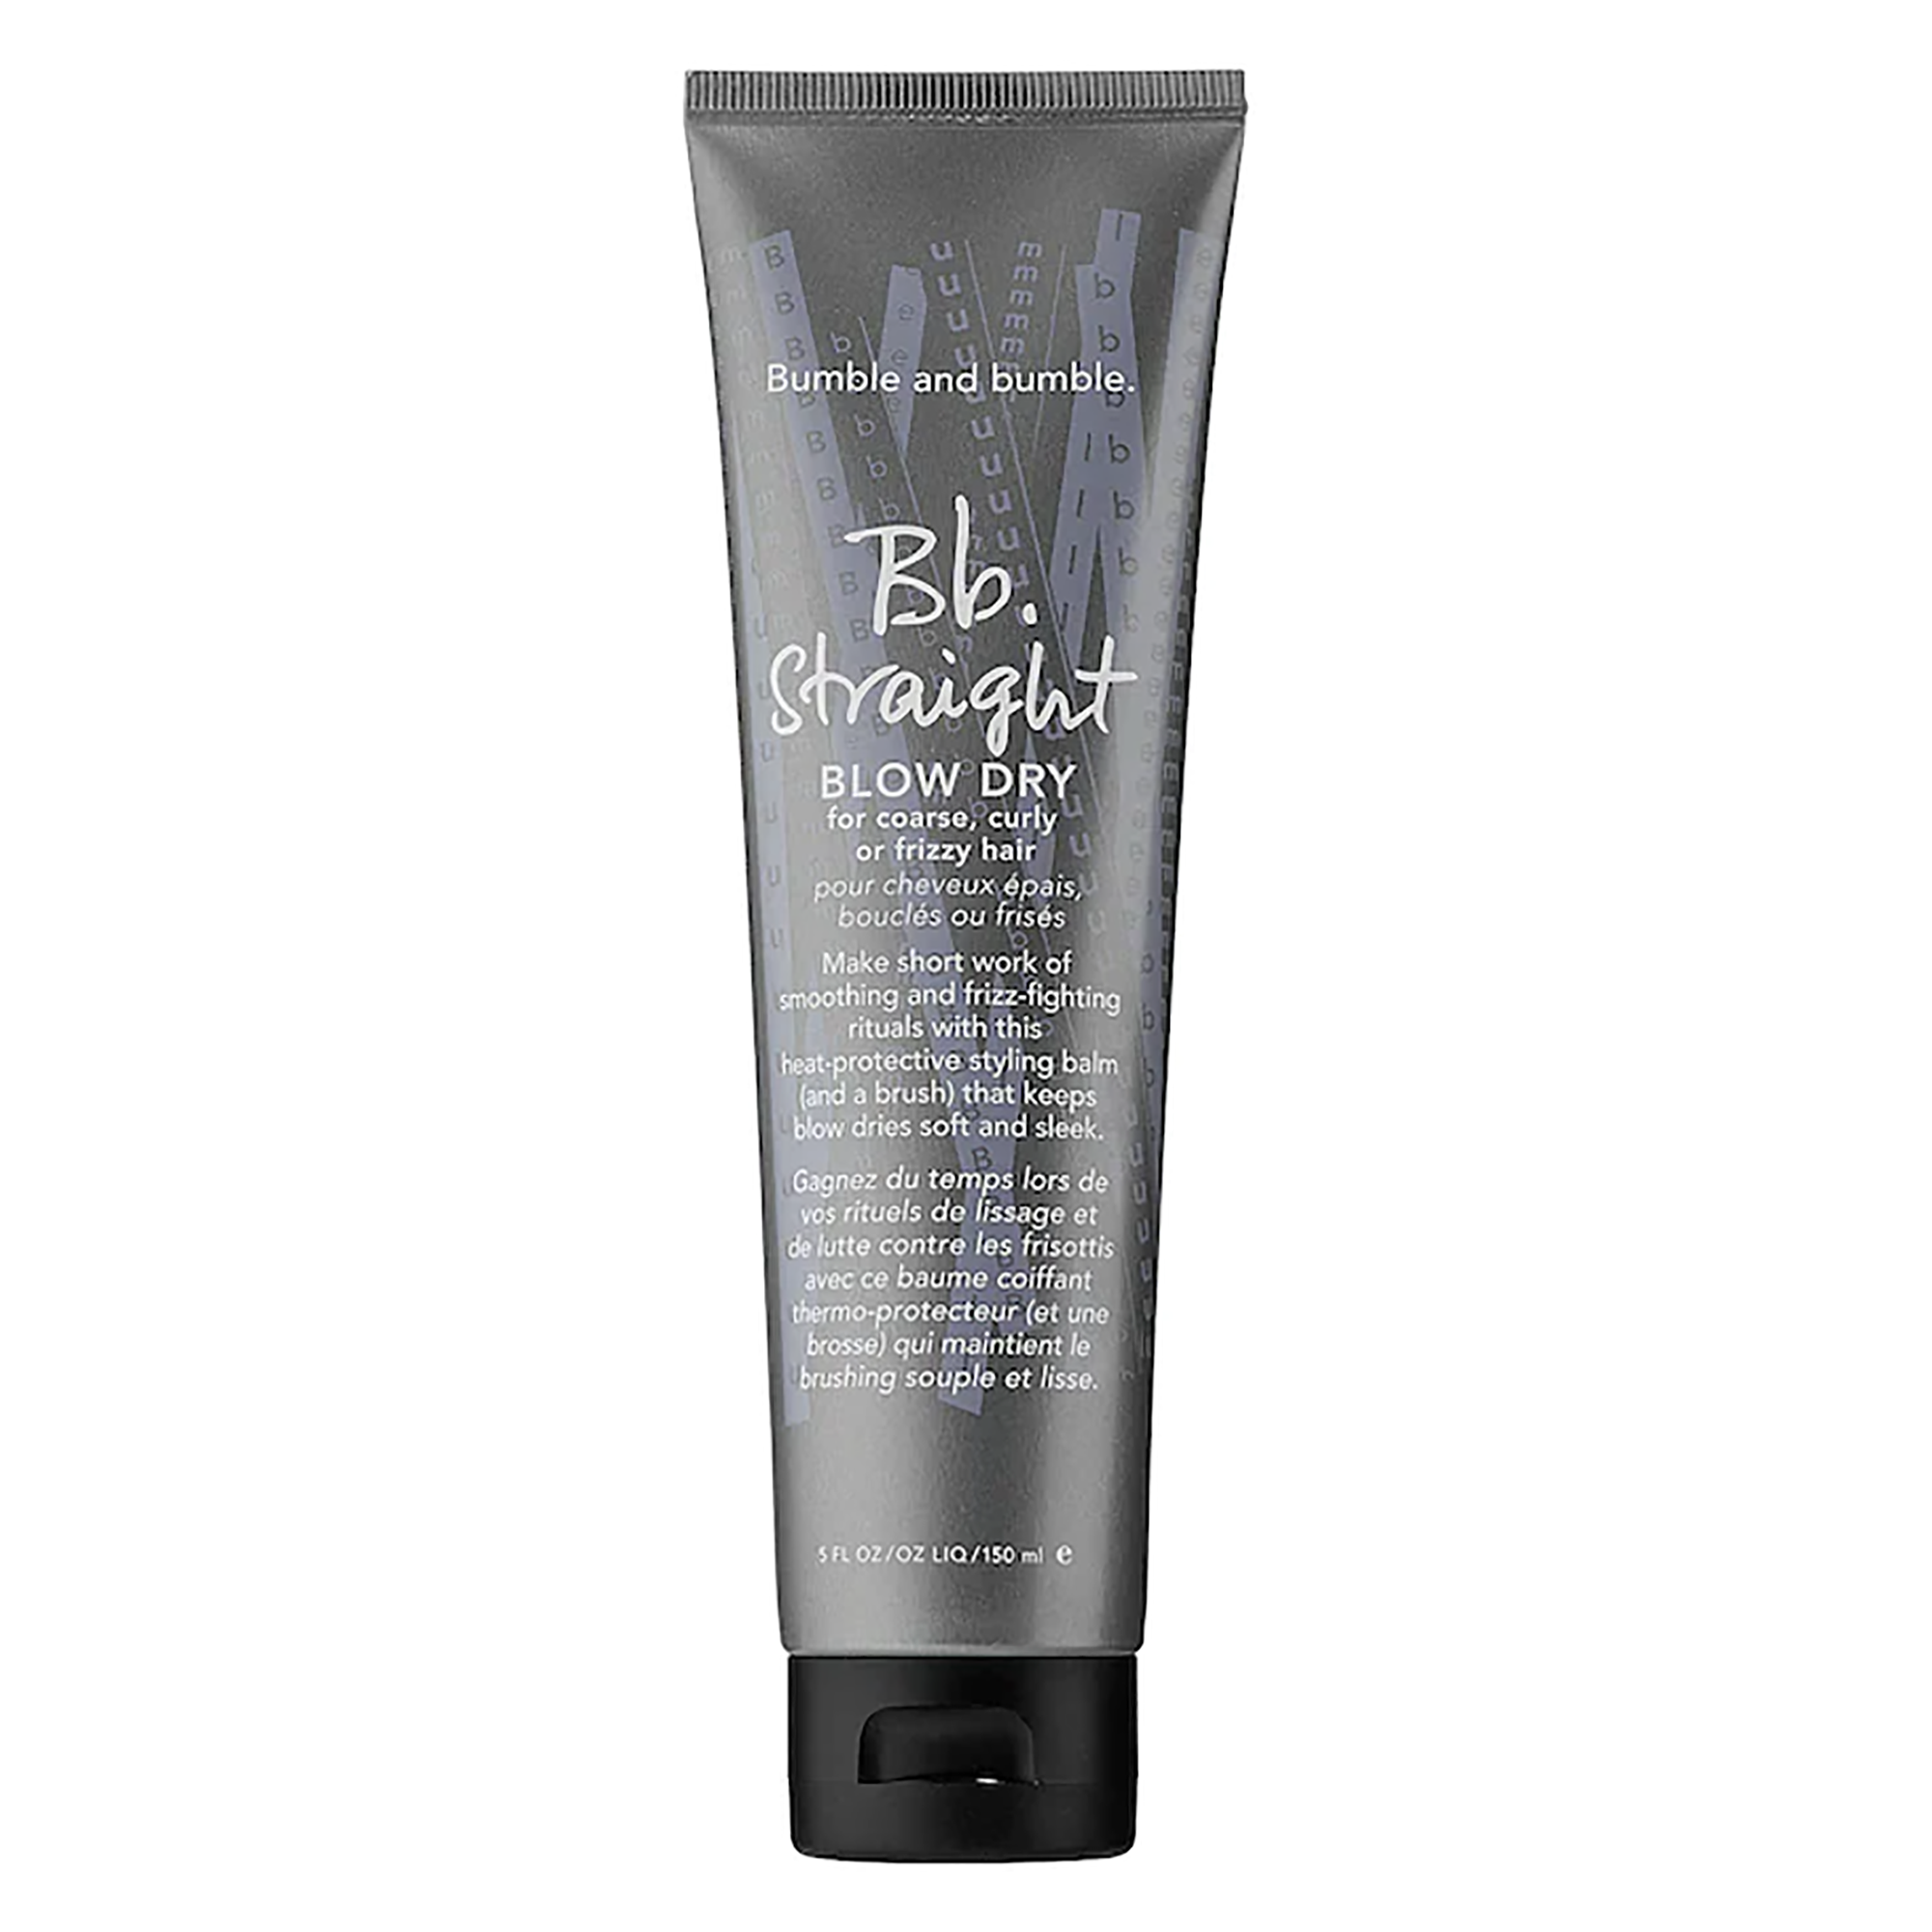 Bumble and bumble Straight Blow Dry / 5OZ